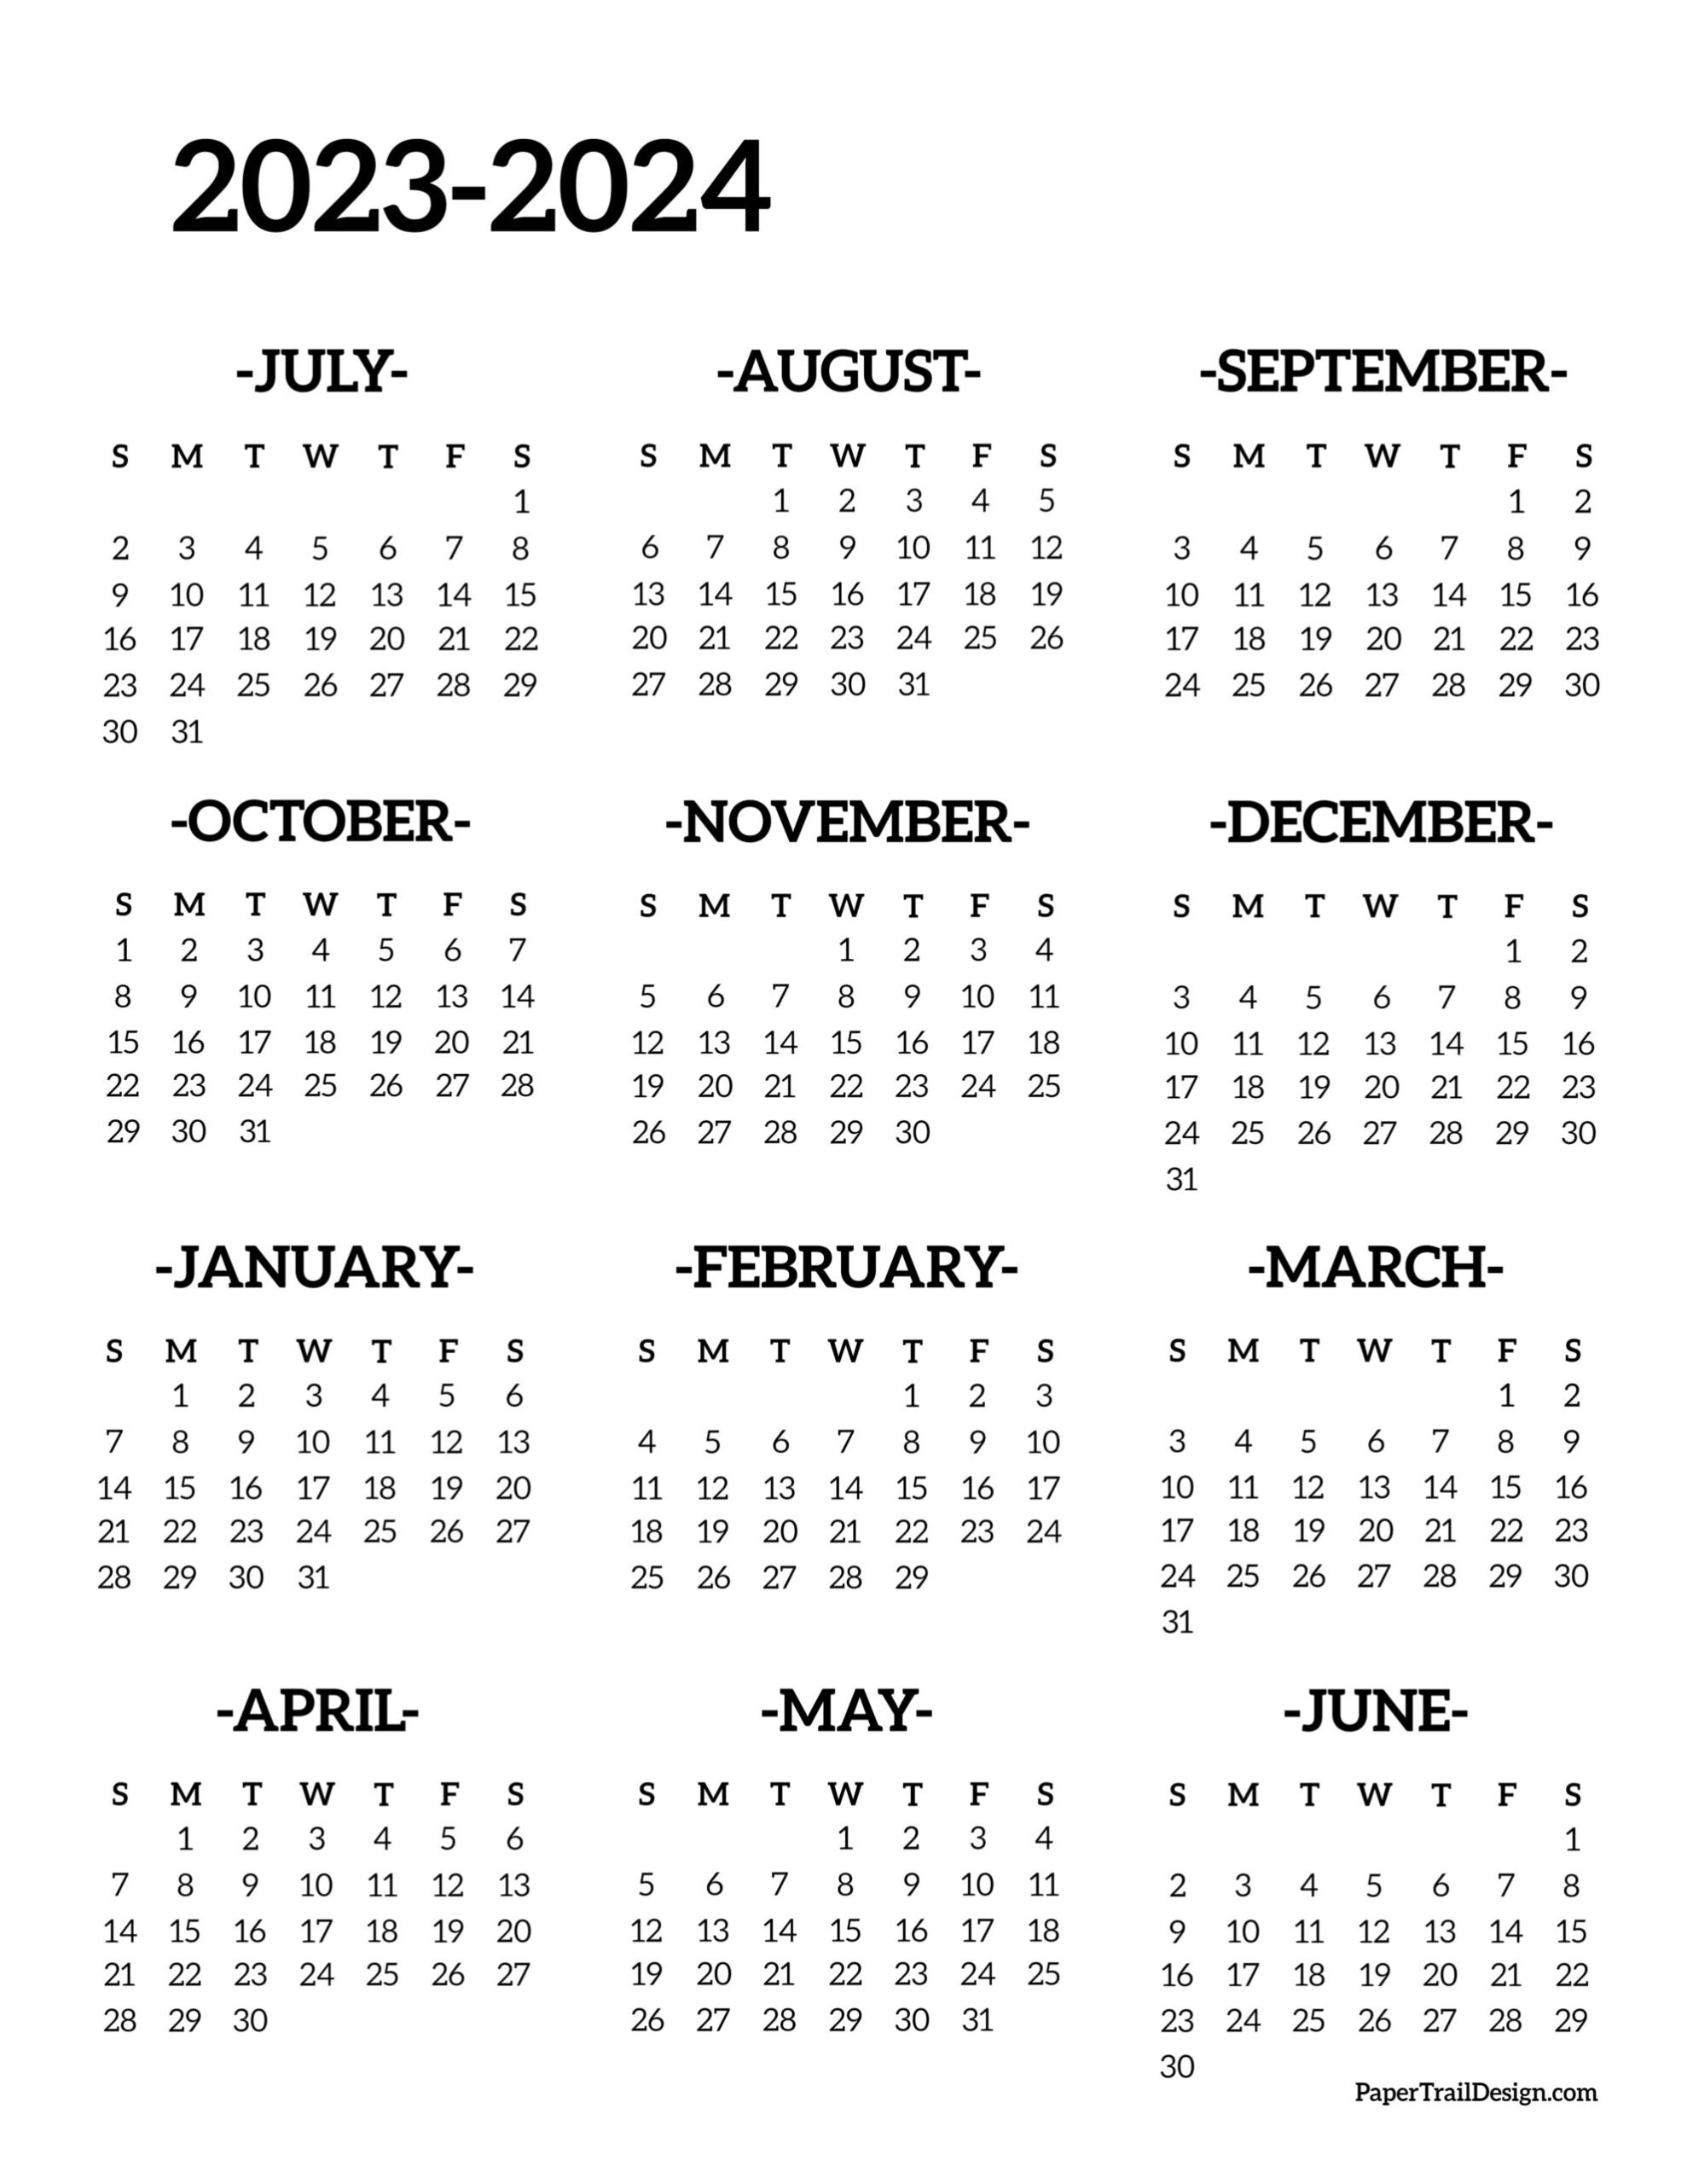 2023-2024 School Year Calendar Free Printable - Paper Trail Design | Yearly Calendar 2023 And 2024 Printable